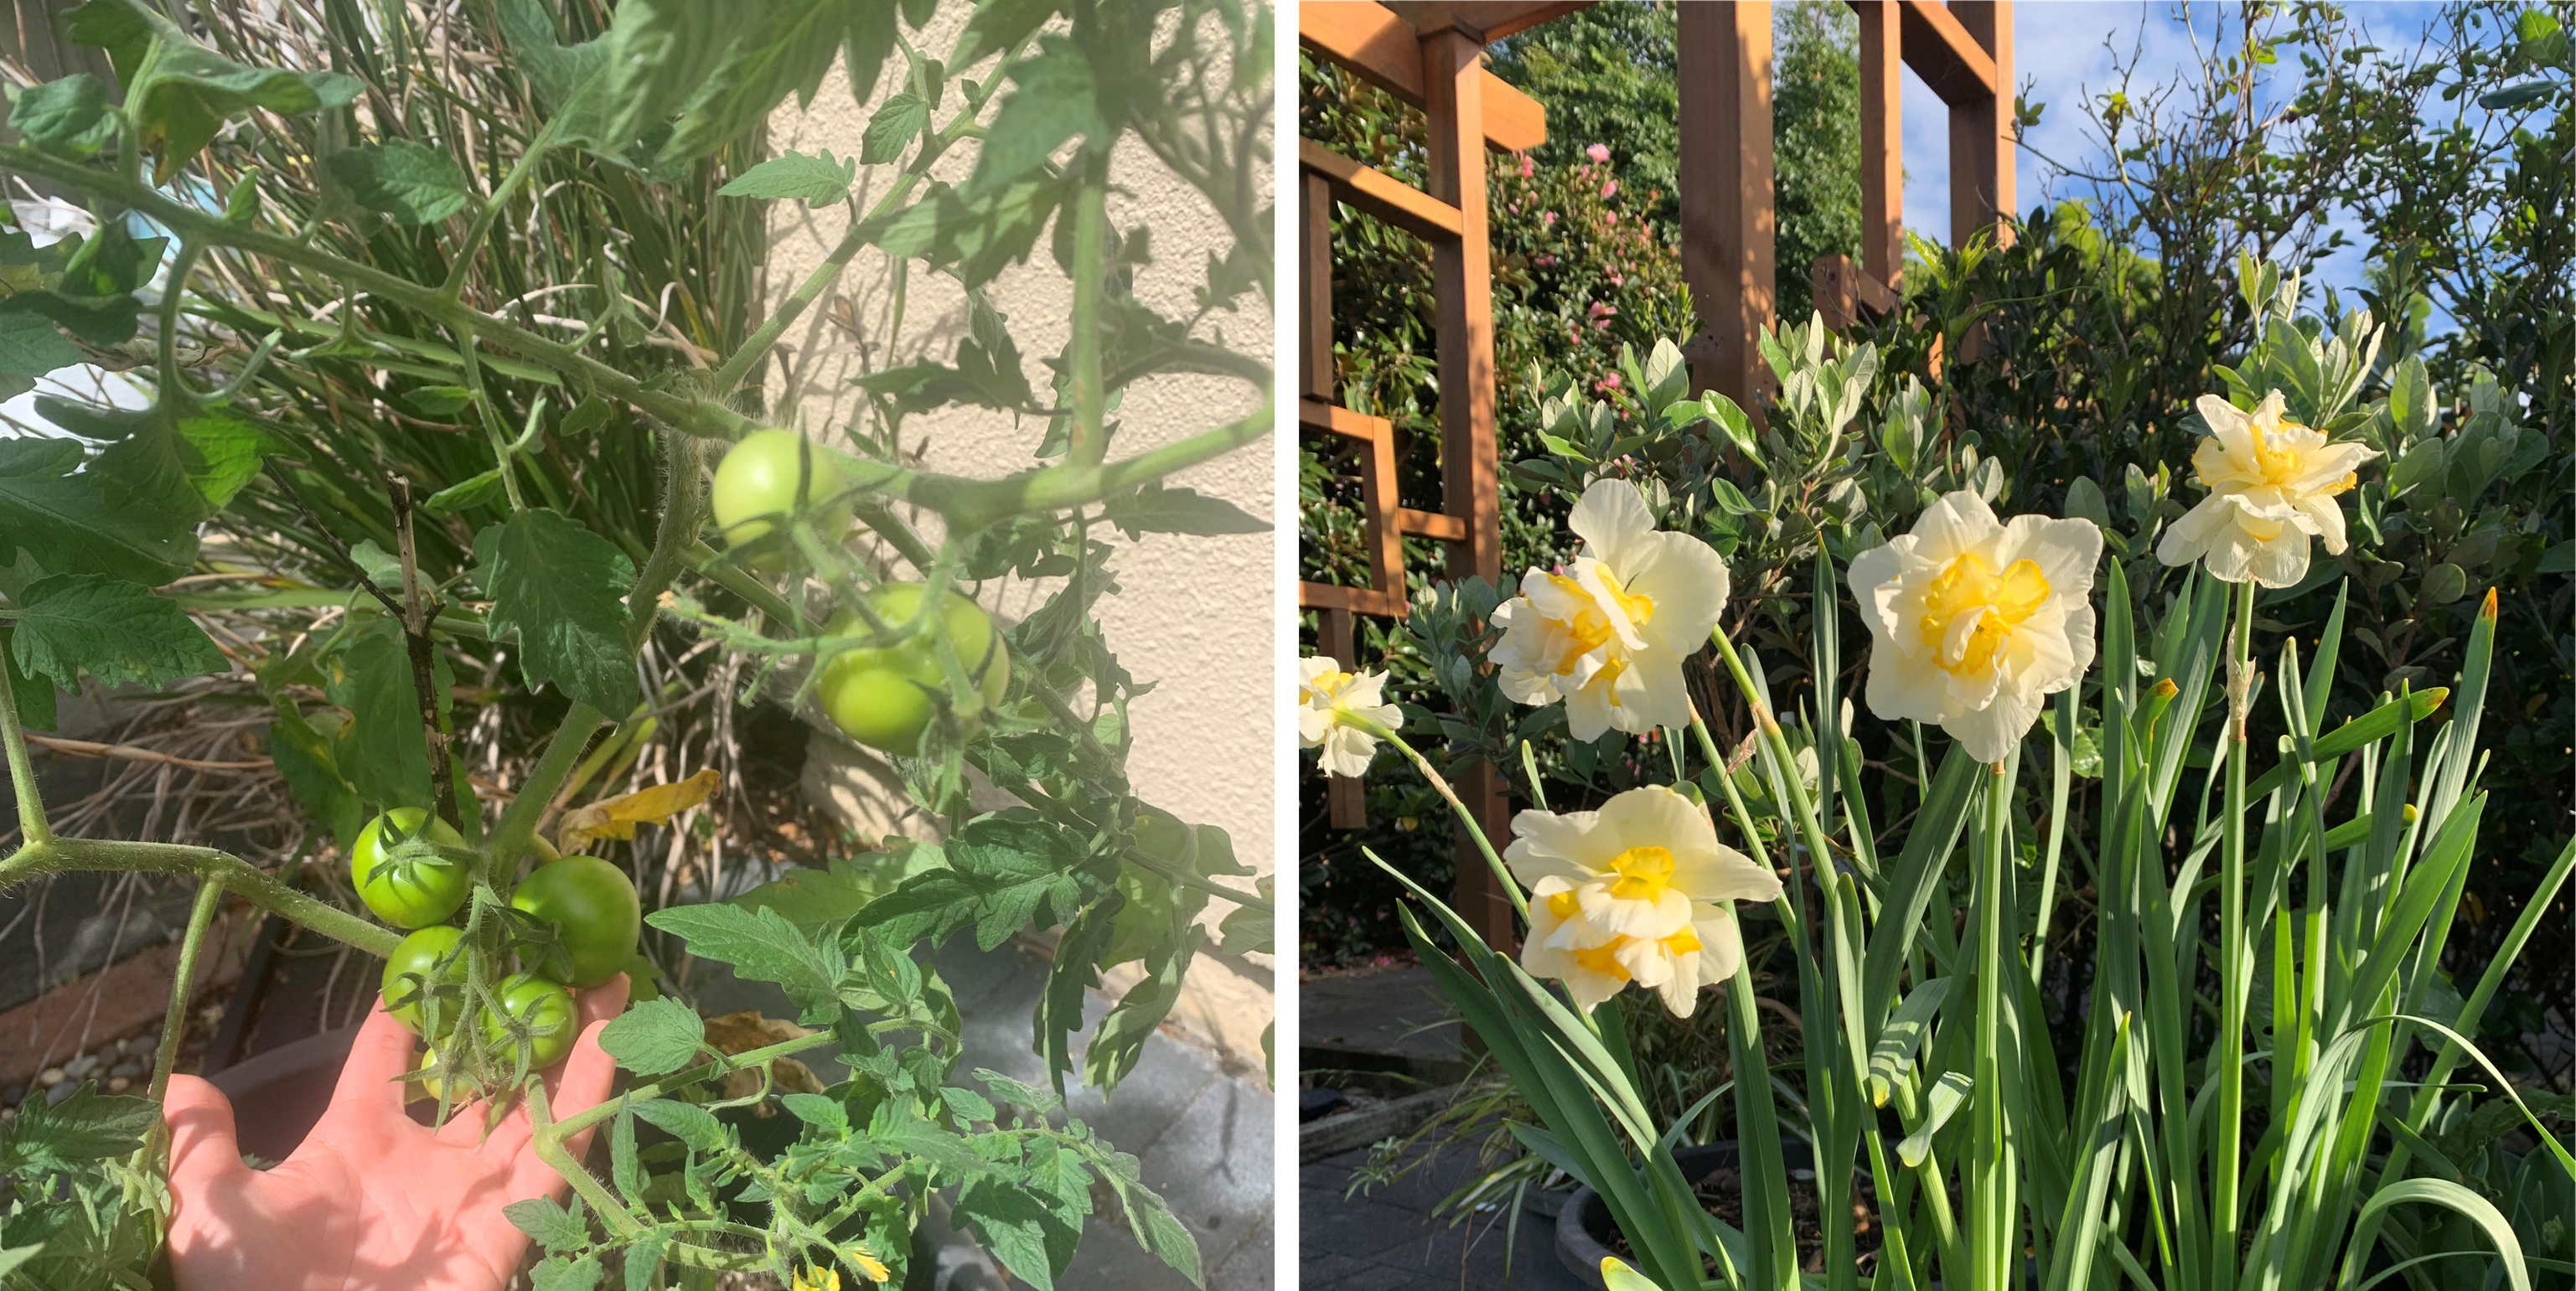 Photos of tomatoes and flowers